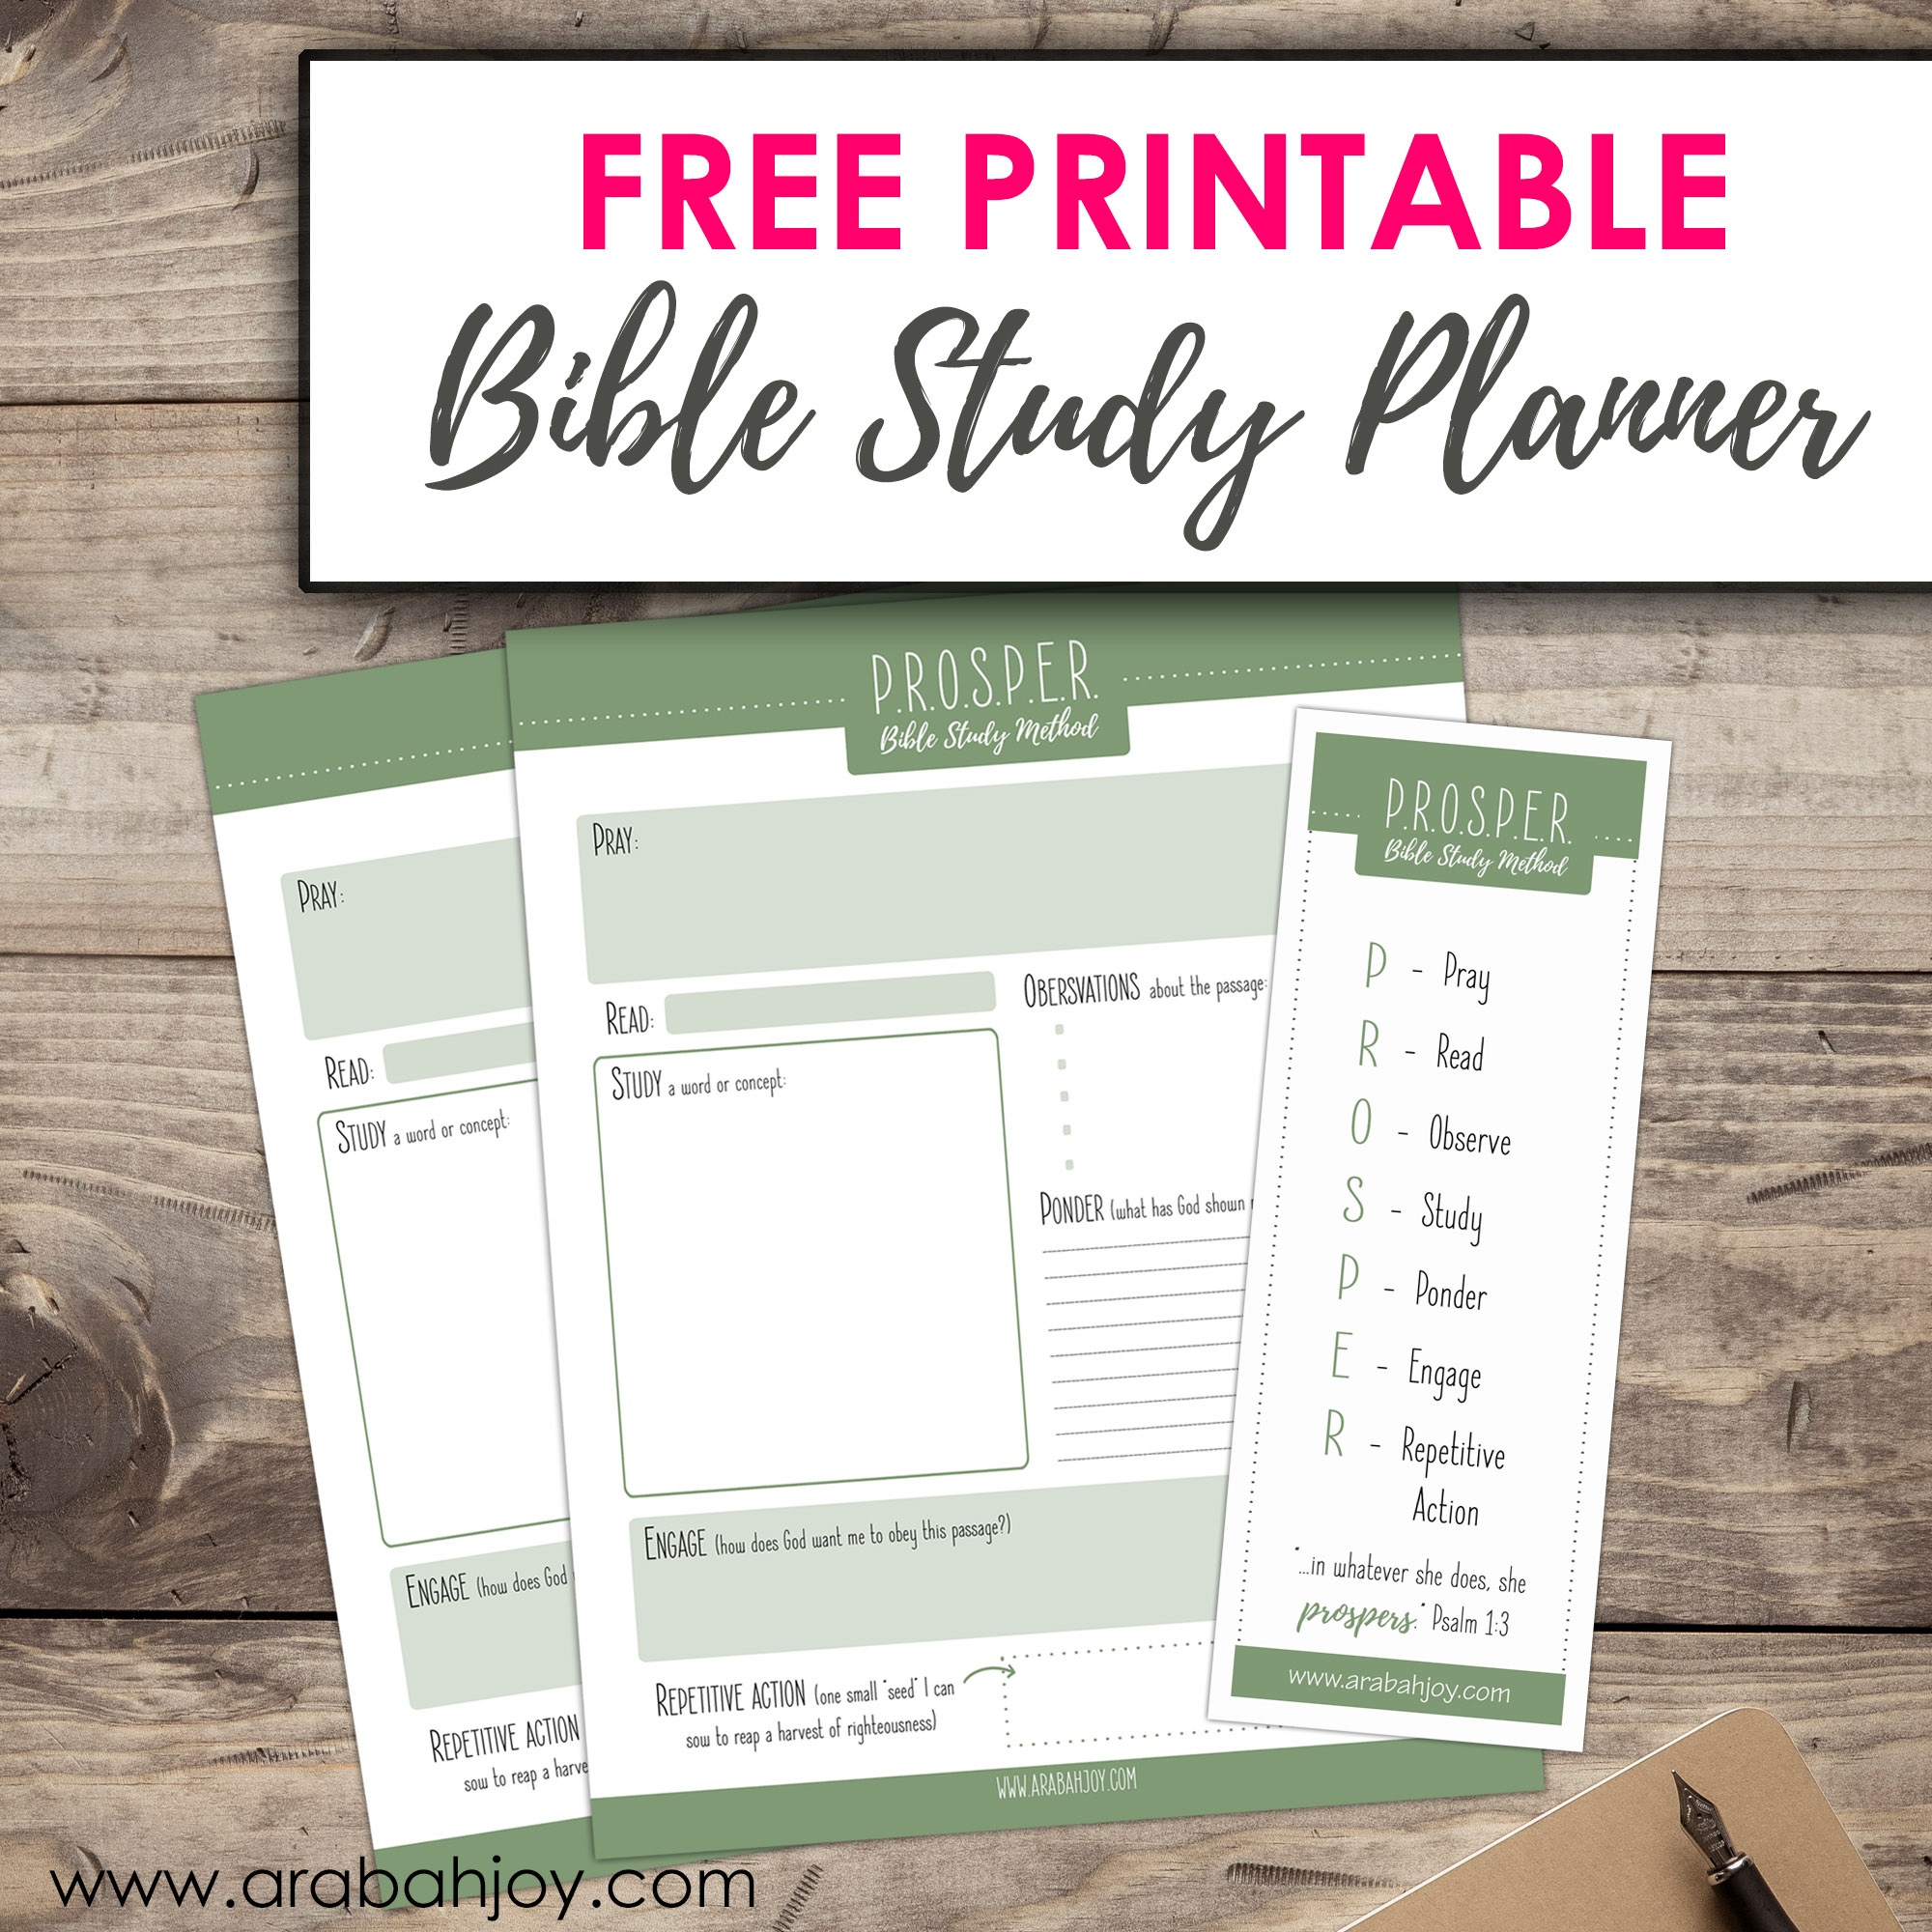 How To Create Your Spiritual Growth Plan - Free Printable Bible Study Guides